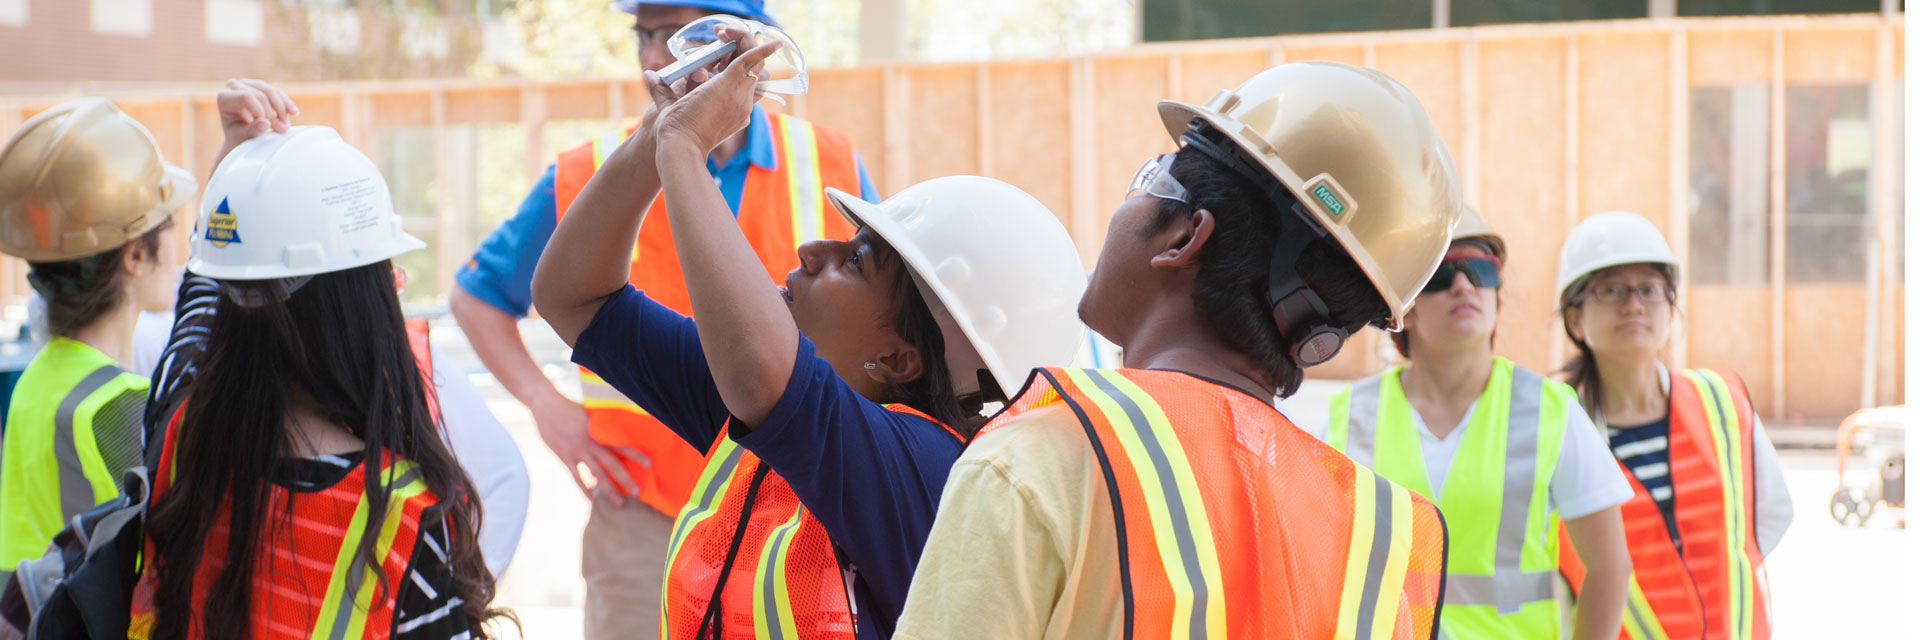 Male and female students observing images through device at construction site. 